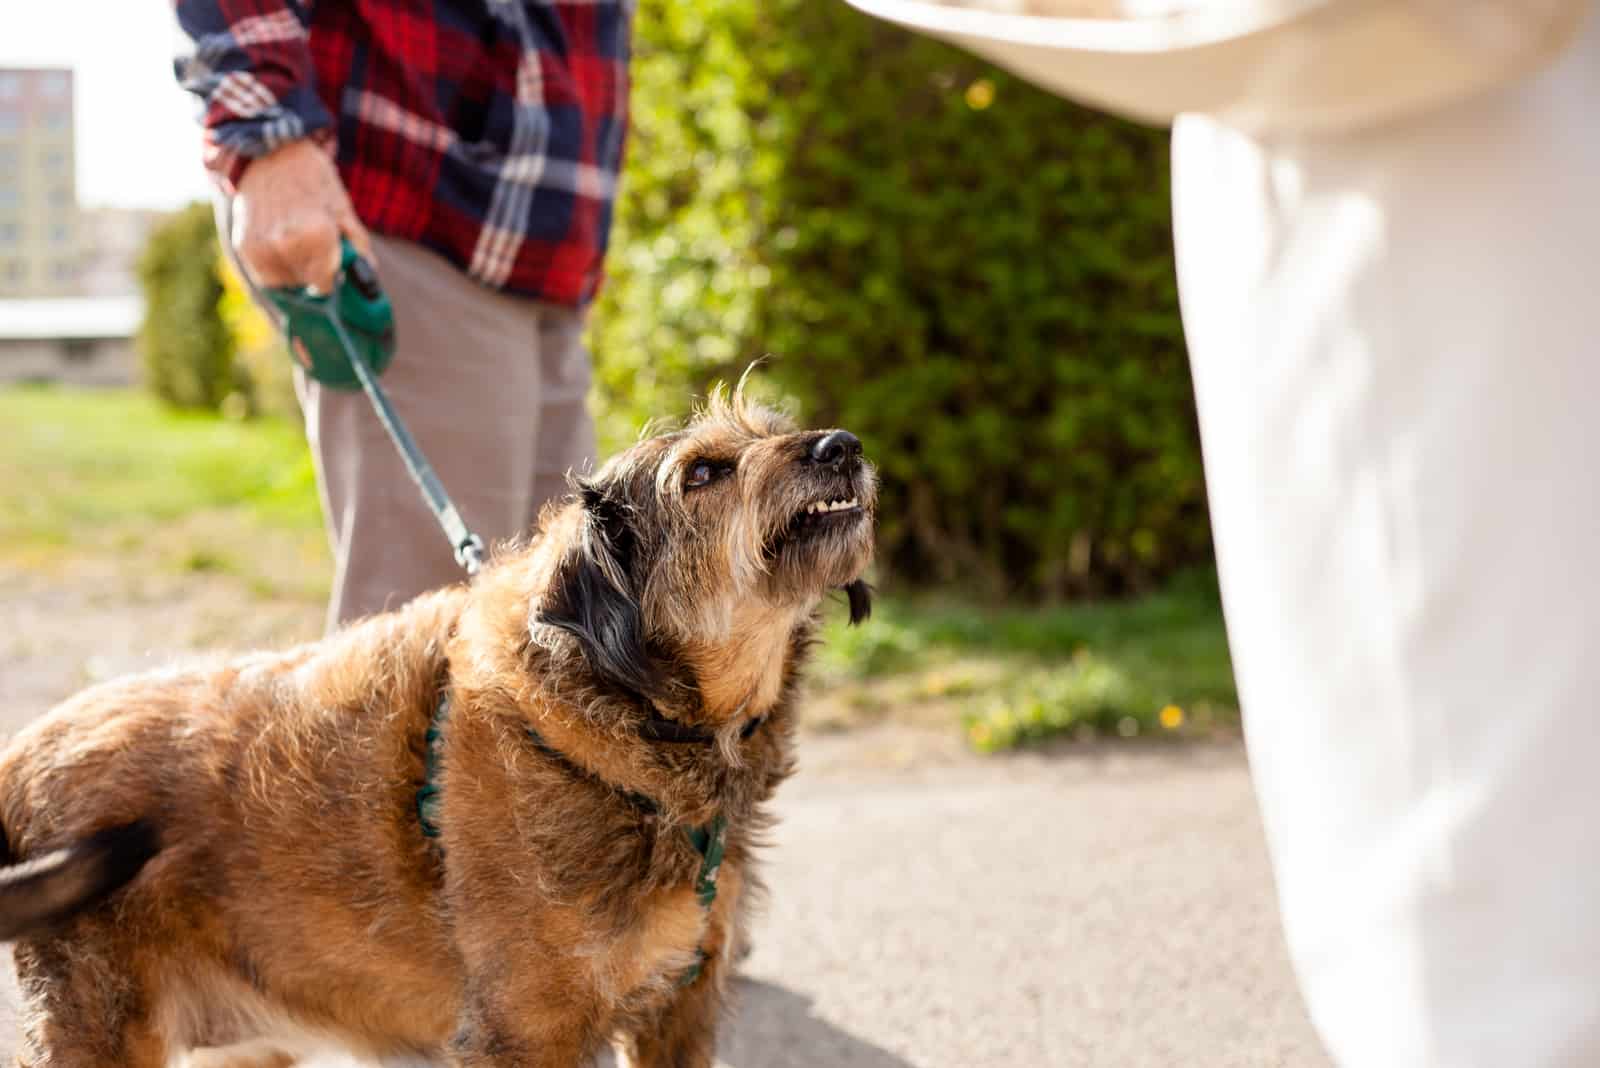 an aggressive dog on a leash barking at a person